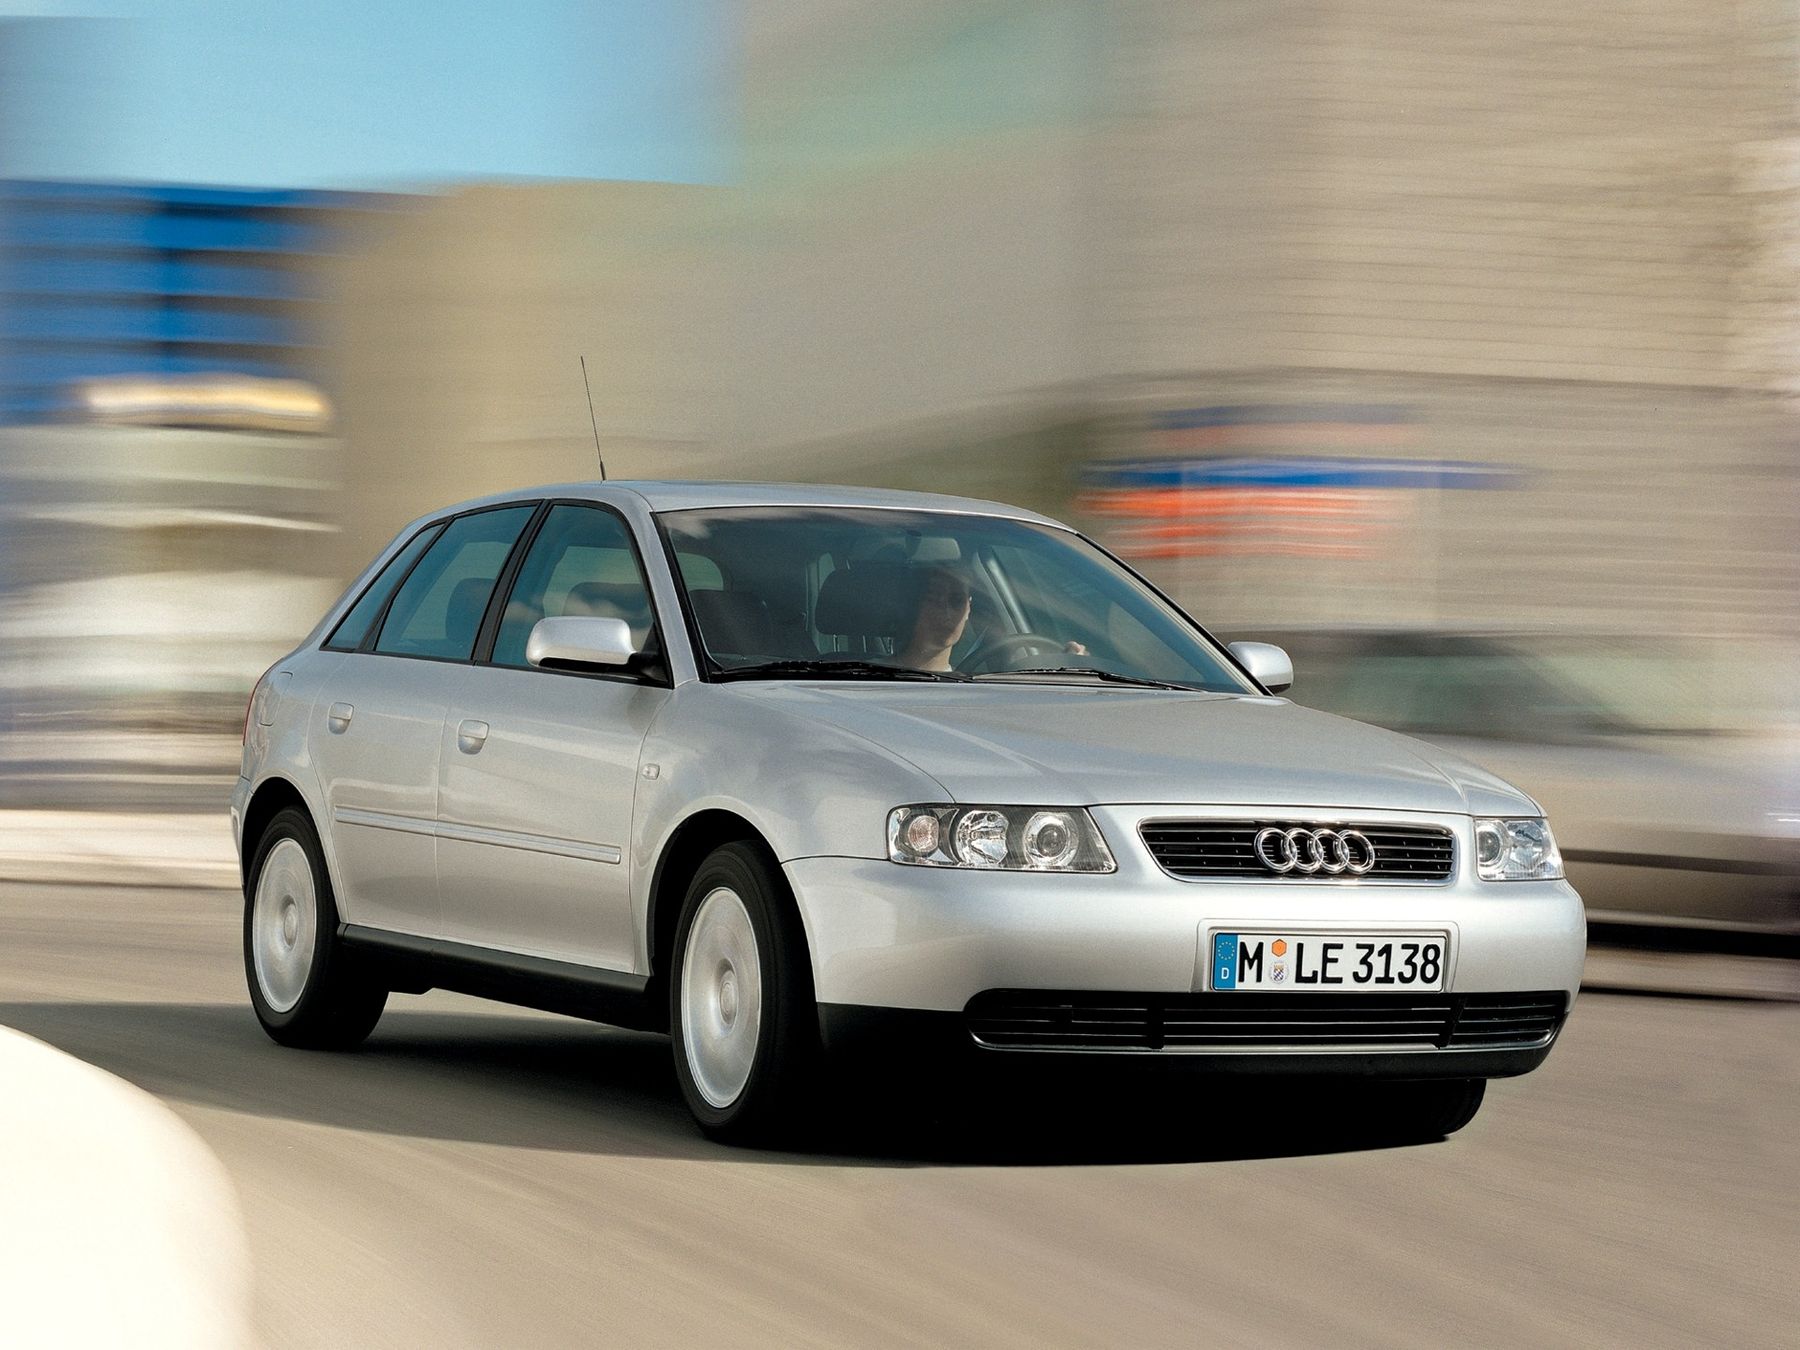 Audi A3 1996 year of release, 1 generation, hatchback 5-door - Trim  versions and modifications of the car on Autoboom —